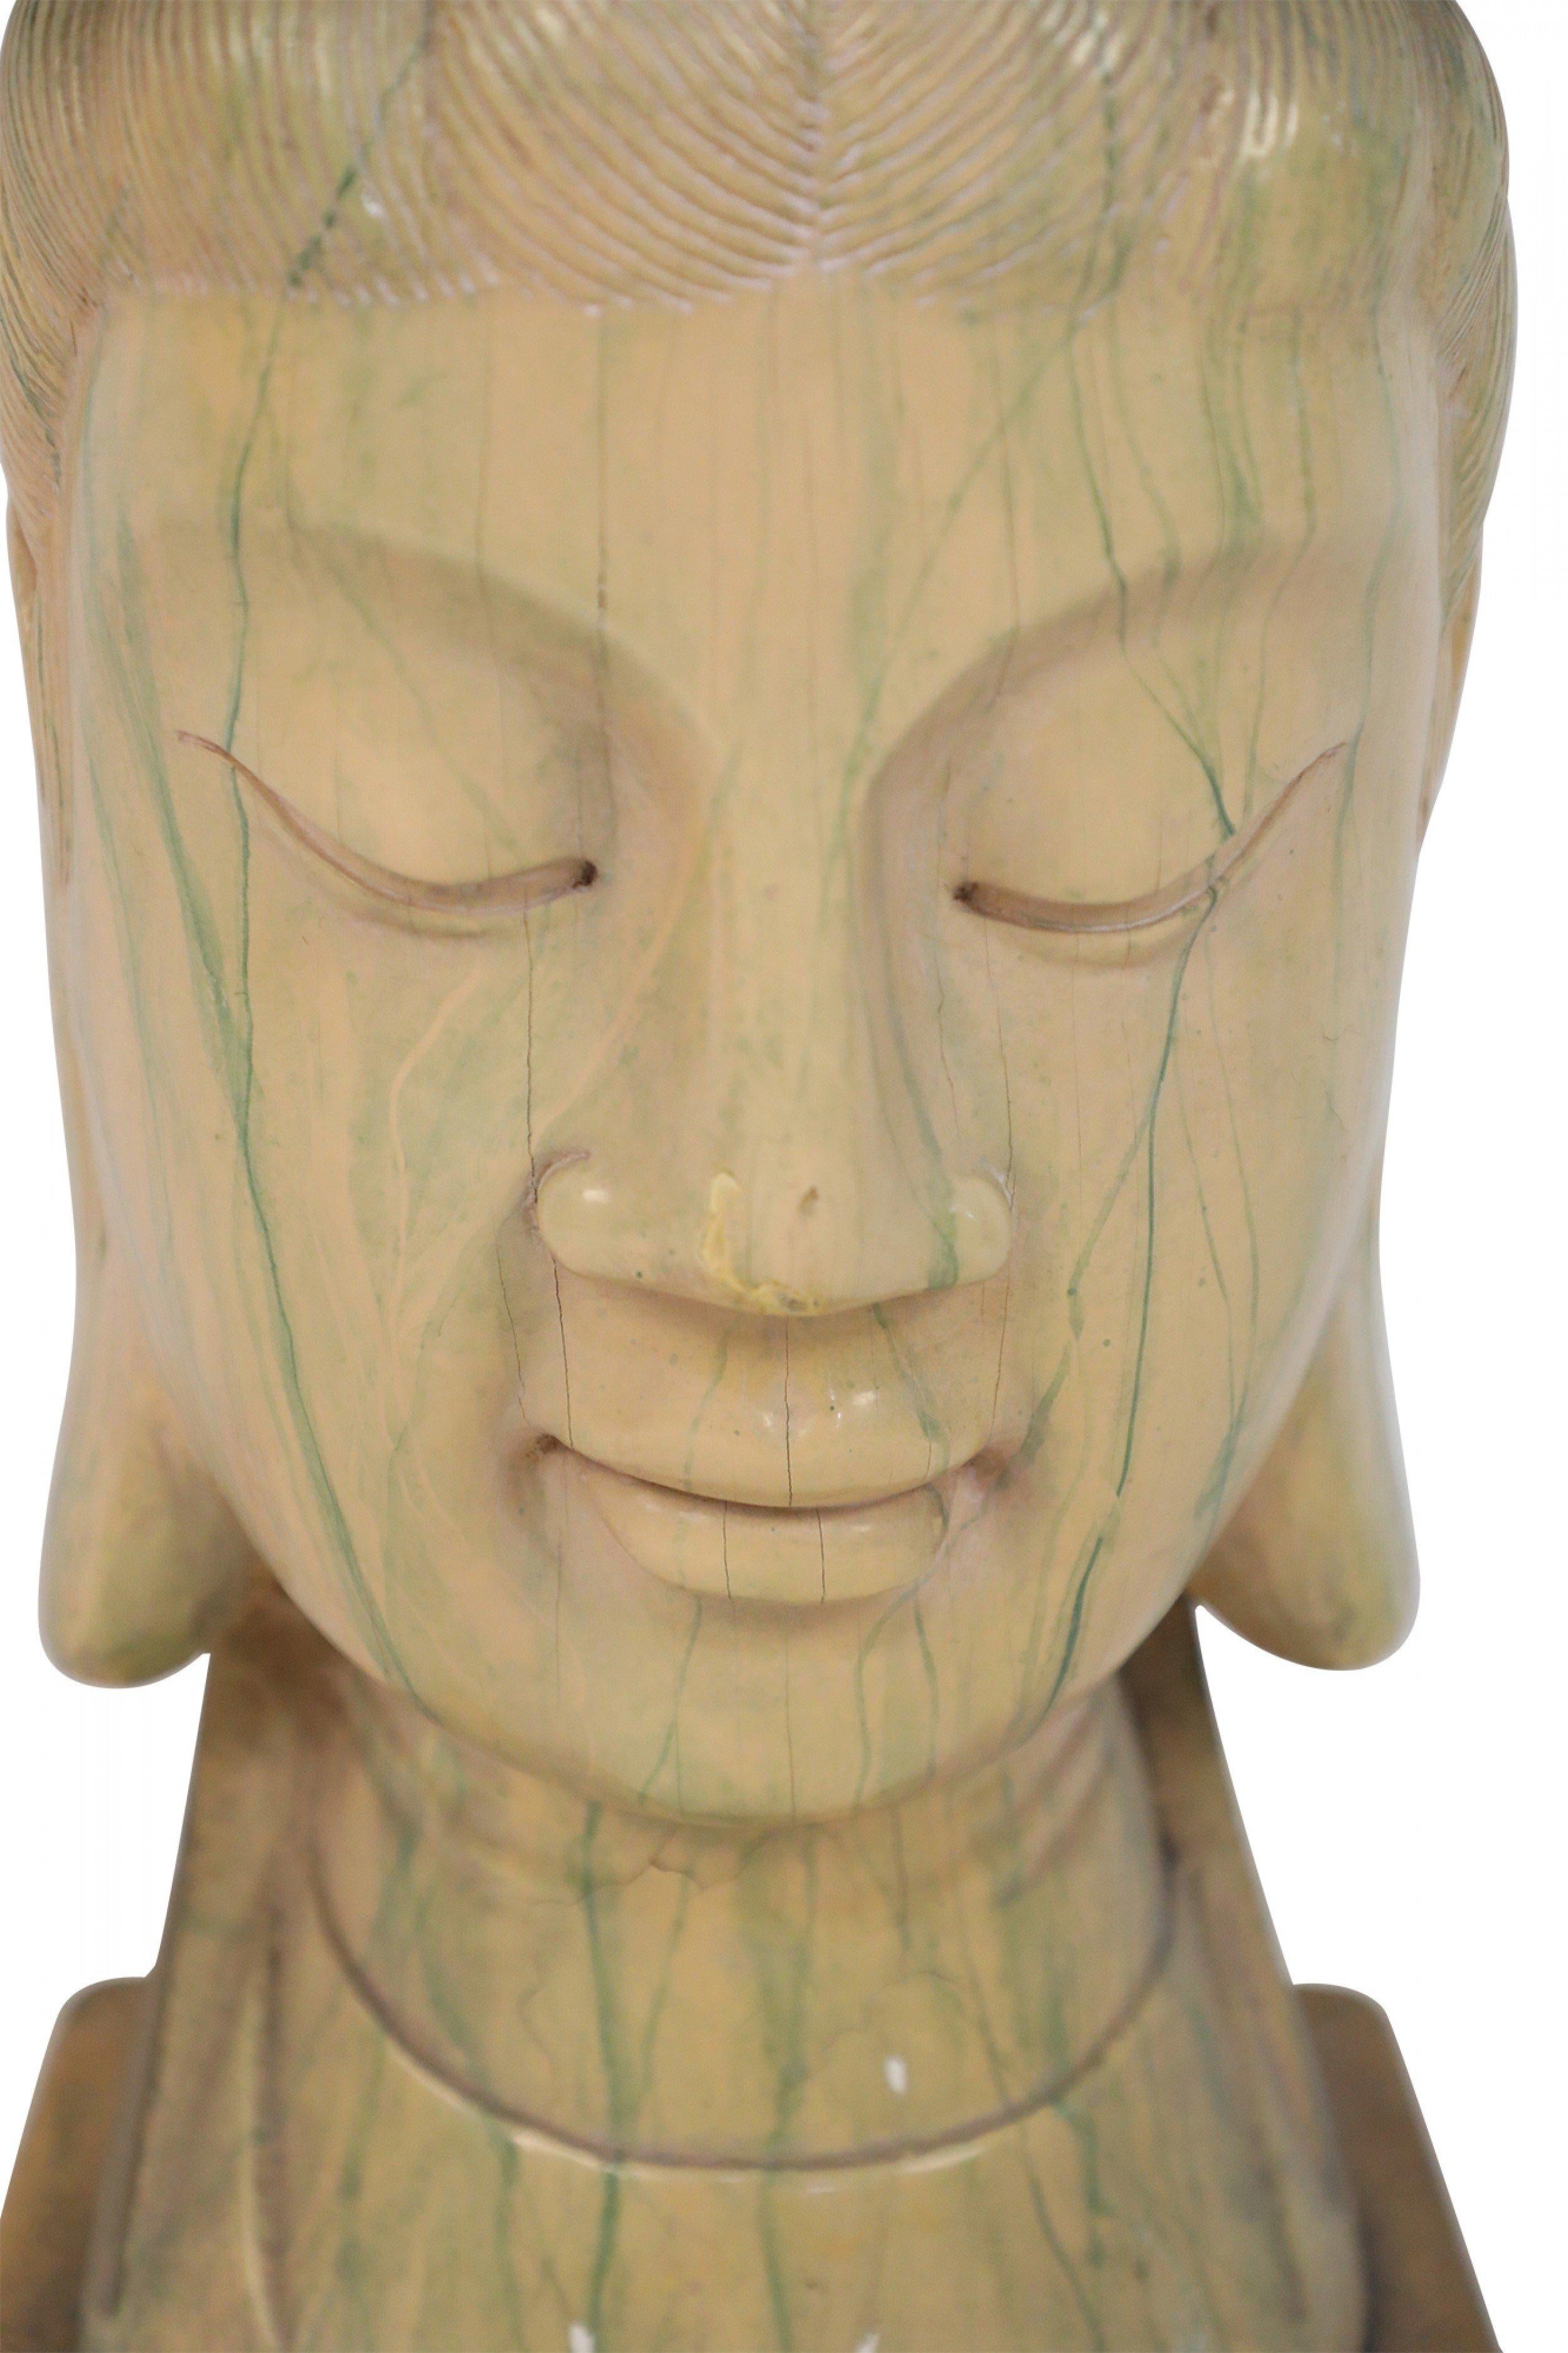 Large Chinese Carved and Painted Wooden Buddha Head Table Lamp For Sale 3